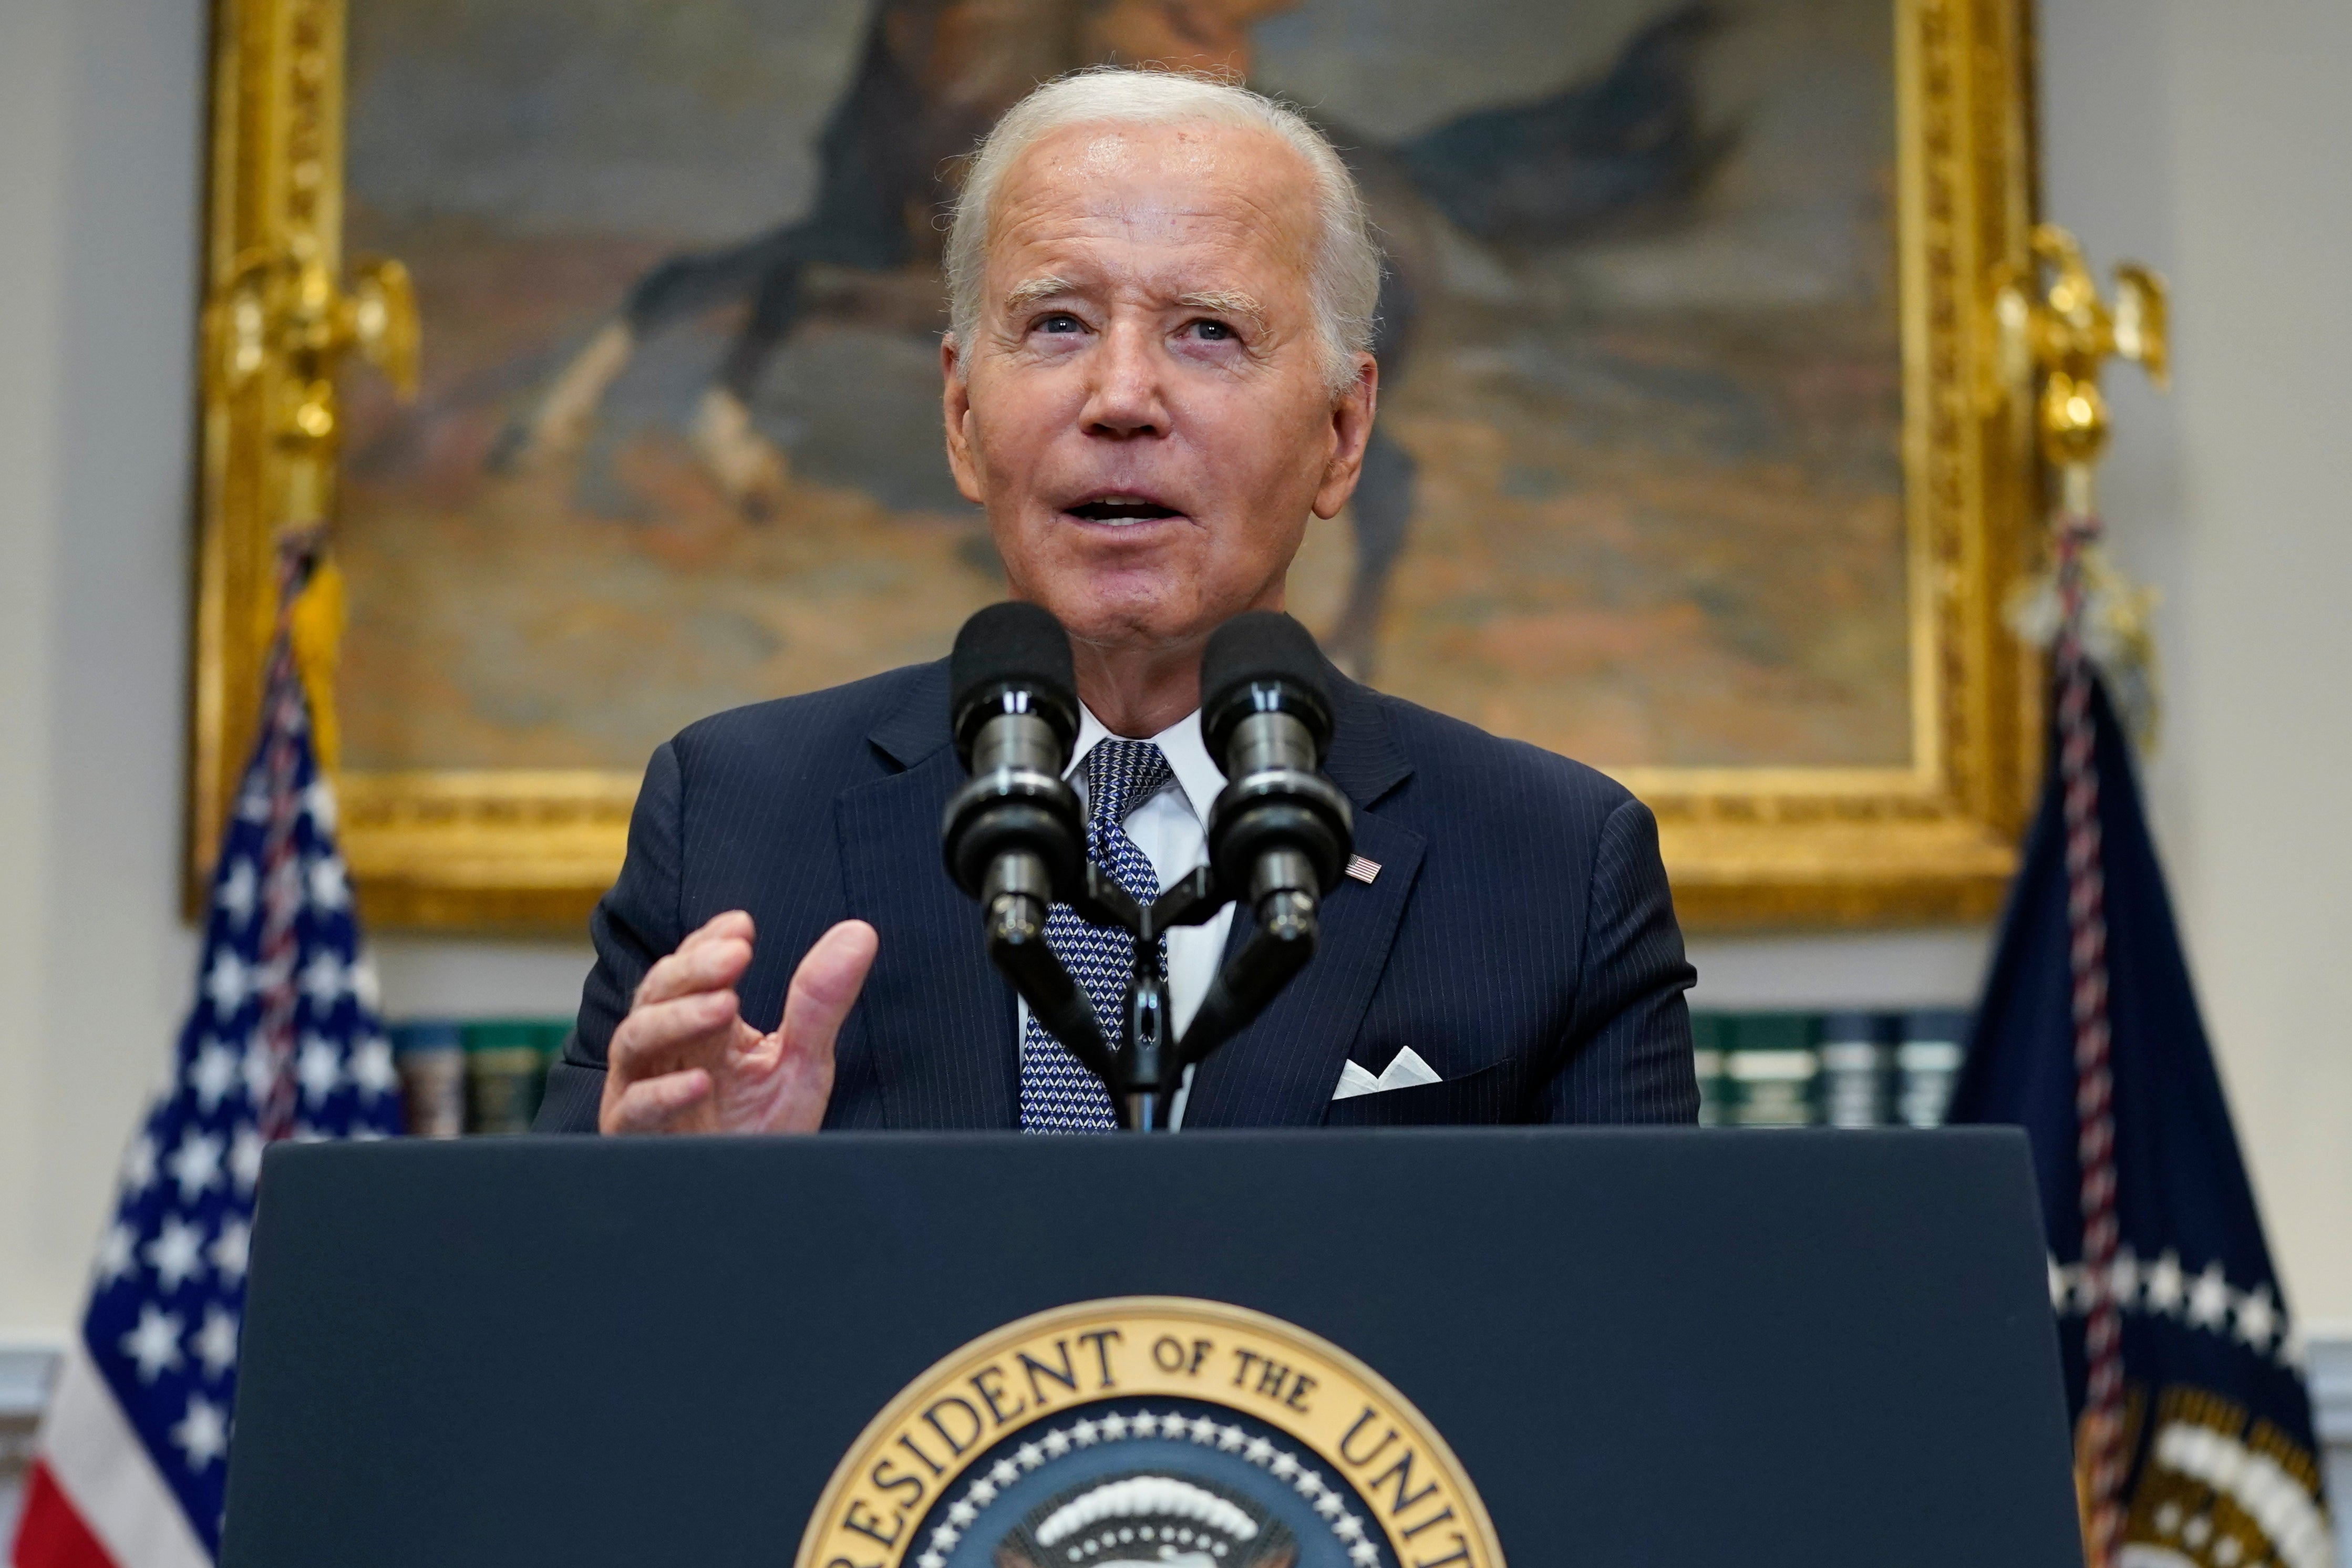 President Joe Biden has once again called for a ban on assault weapons